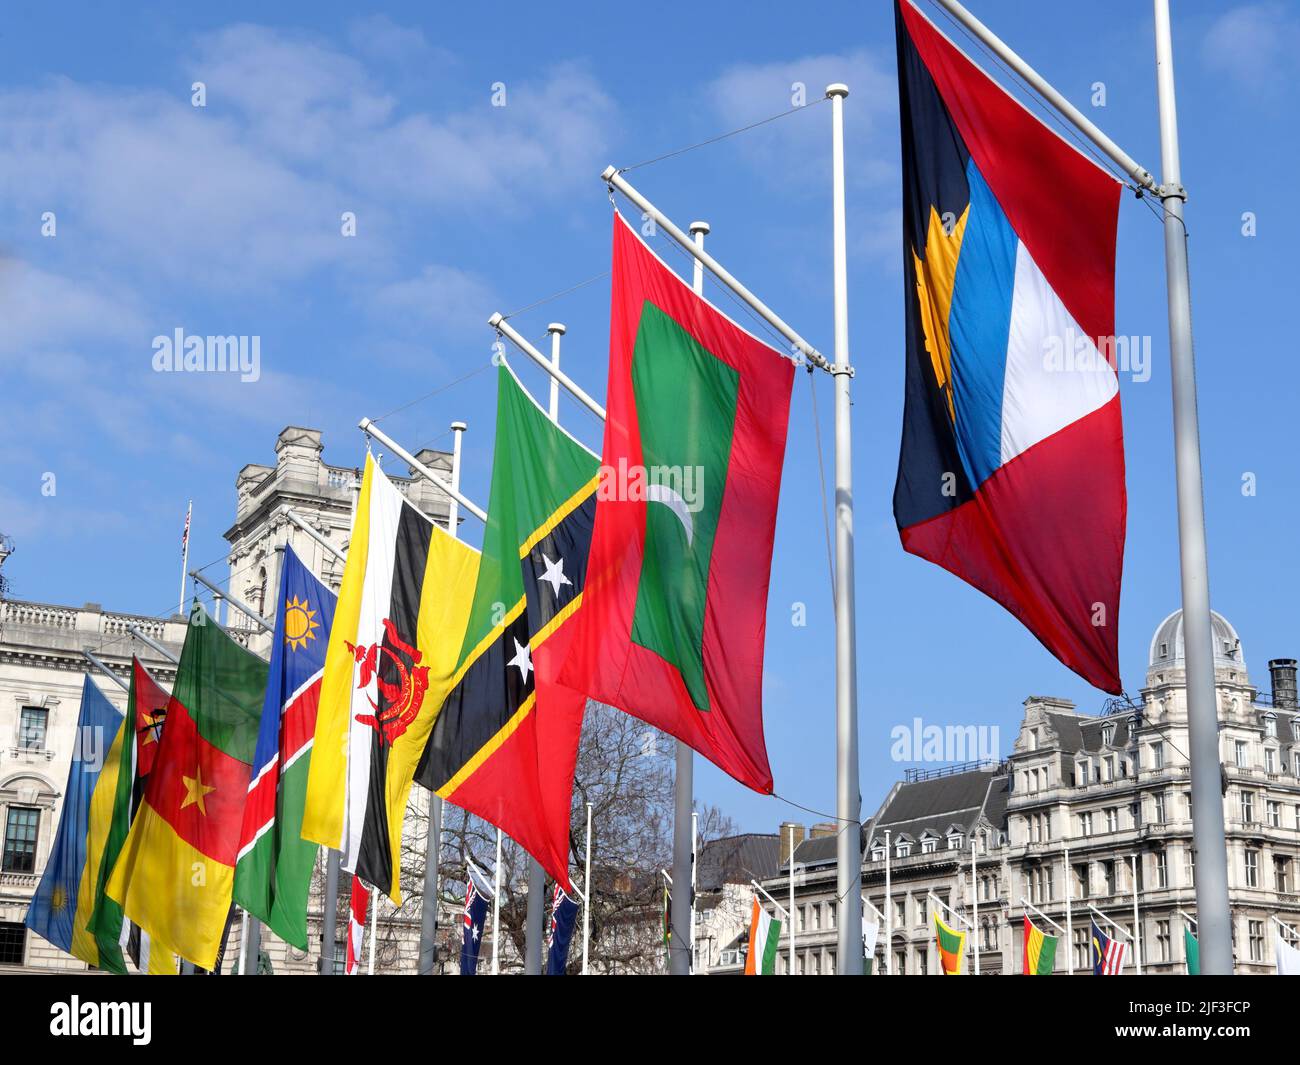 Flags of the Commonwealth of Nations in the Parliament Square Garden, London, United Kingdom Stock Photo